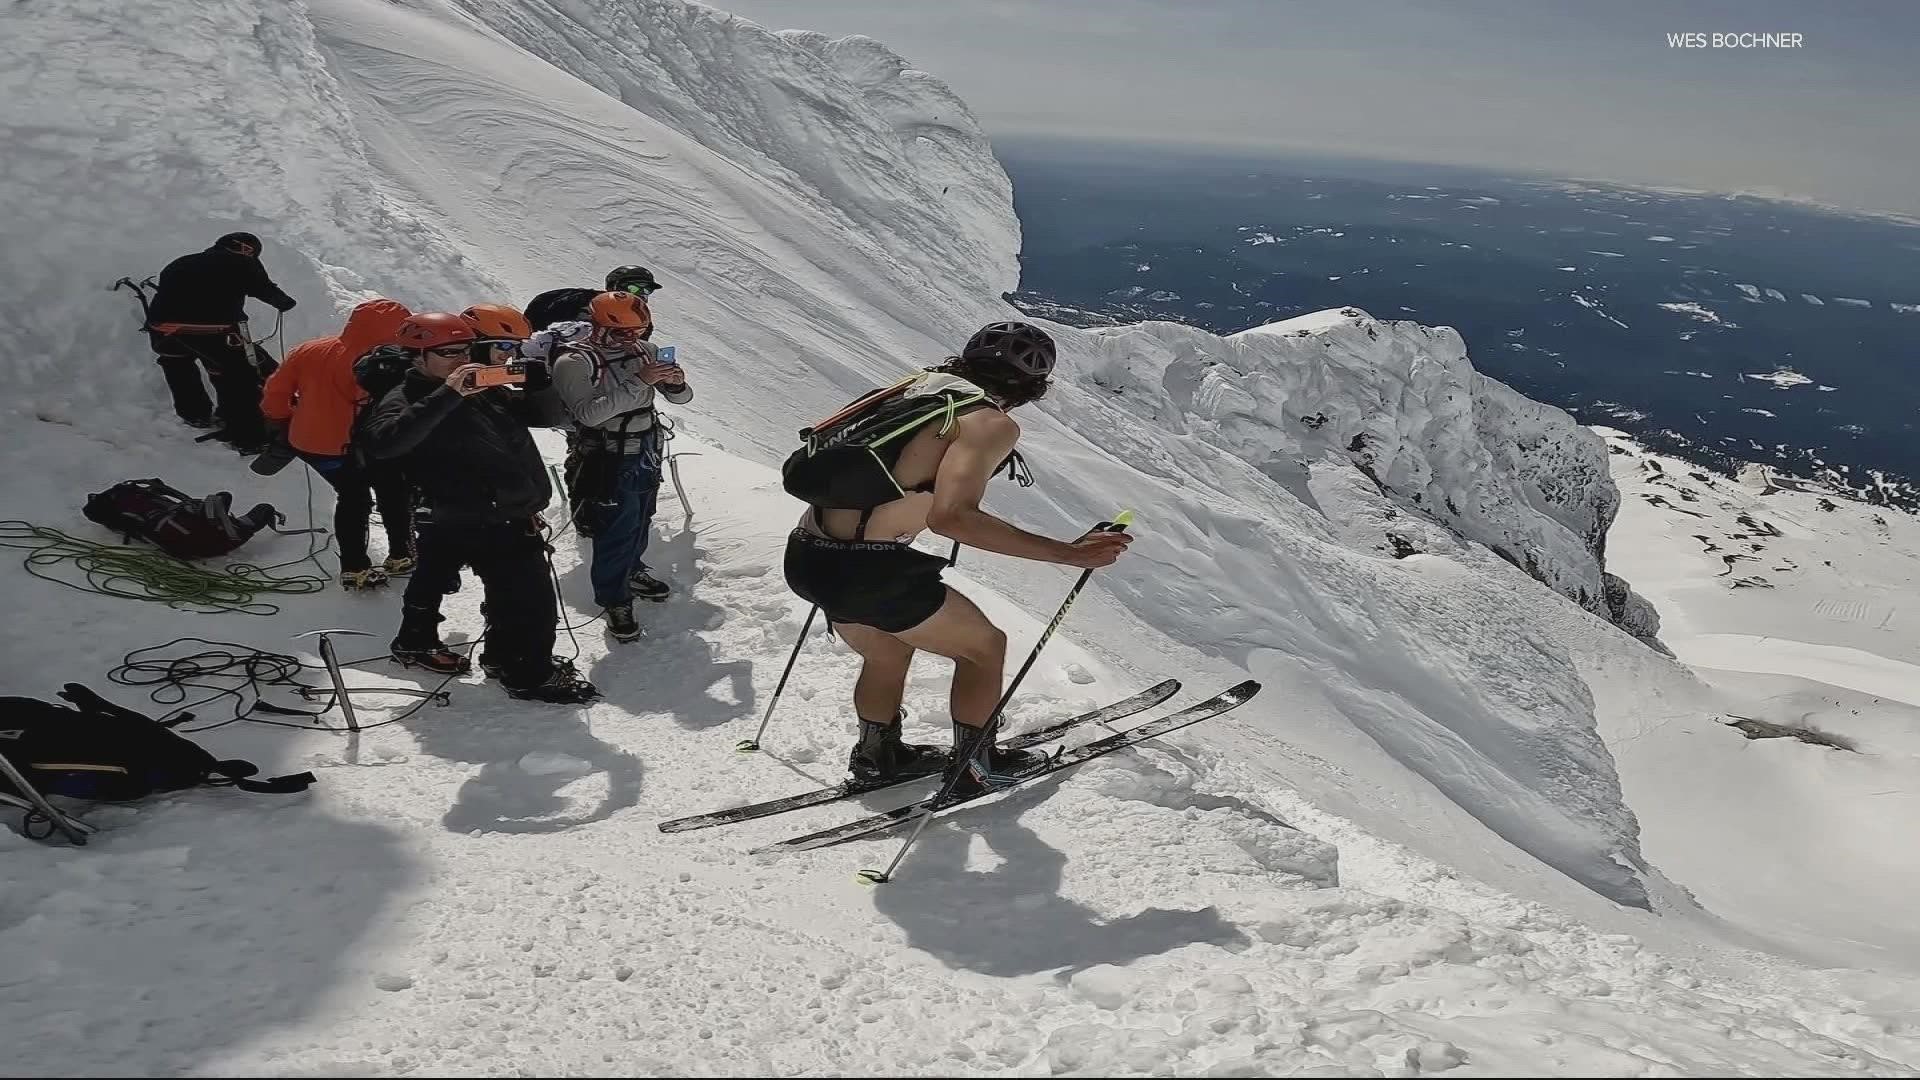 Jack Kuenzle started in the parking lot of Timberline Lodge, climbing 5,200 feet to the summit, then skied down. His total round trip? One hour, 30 minutes.